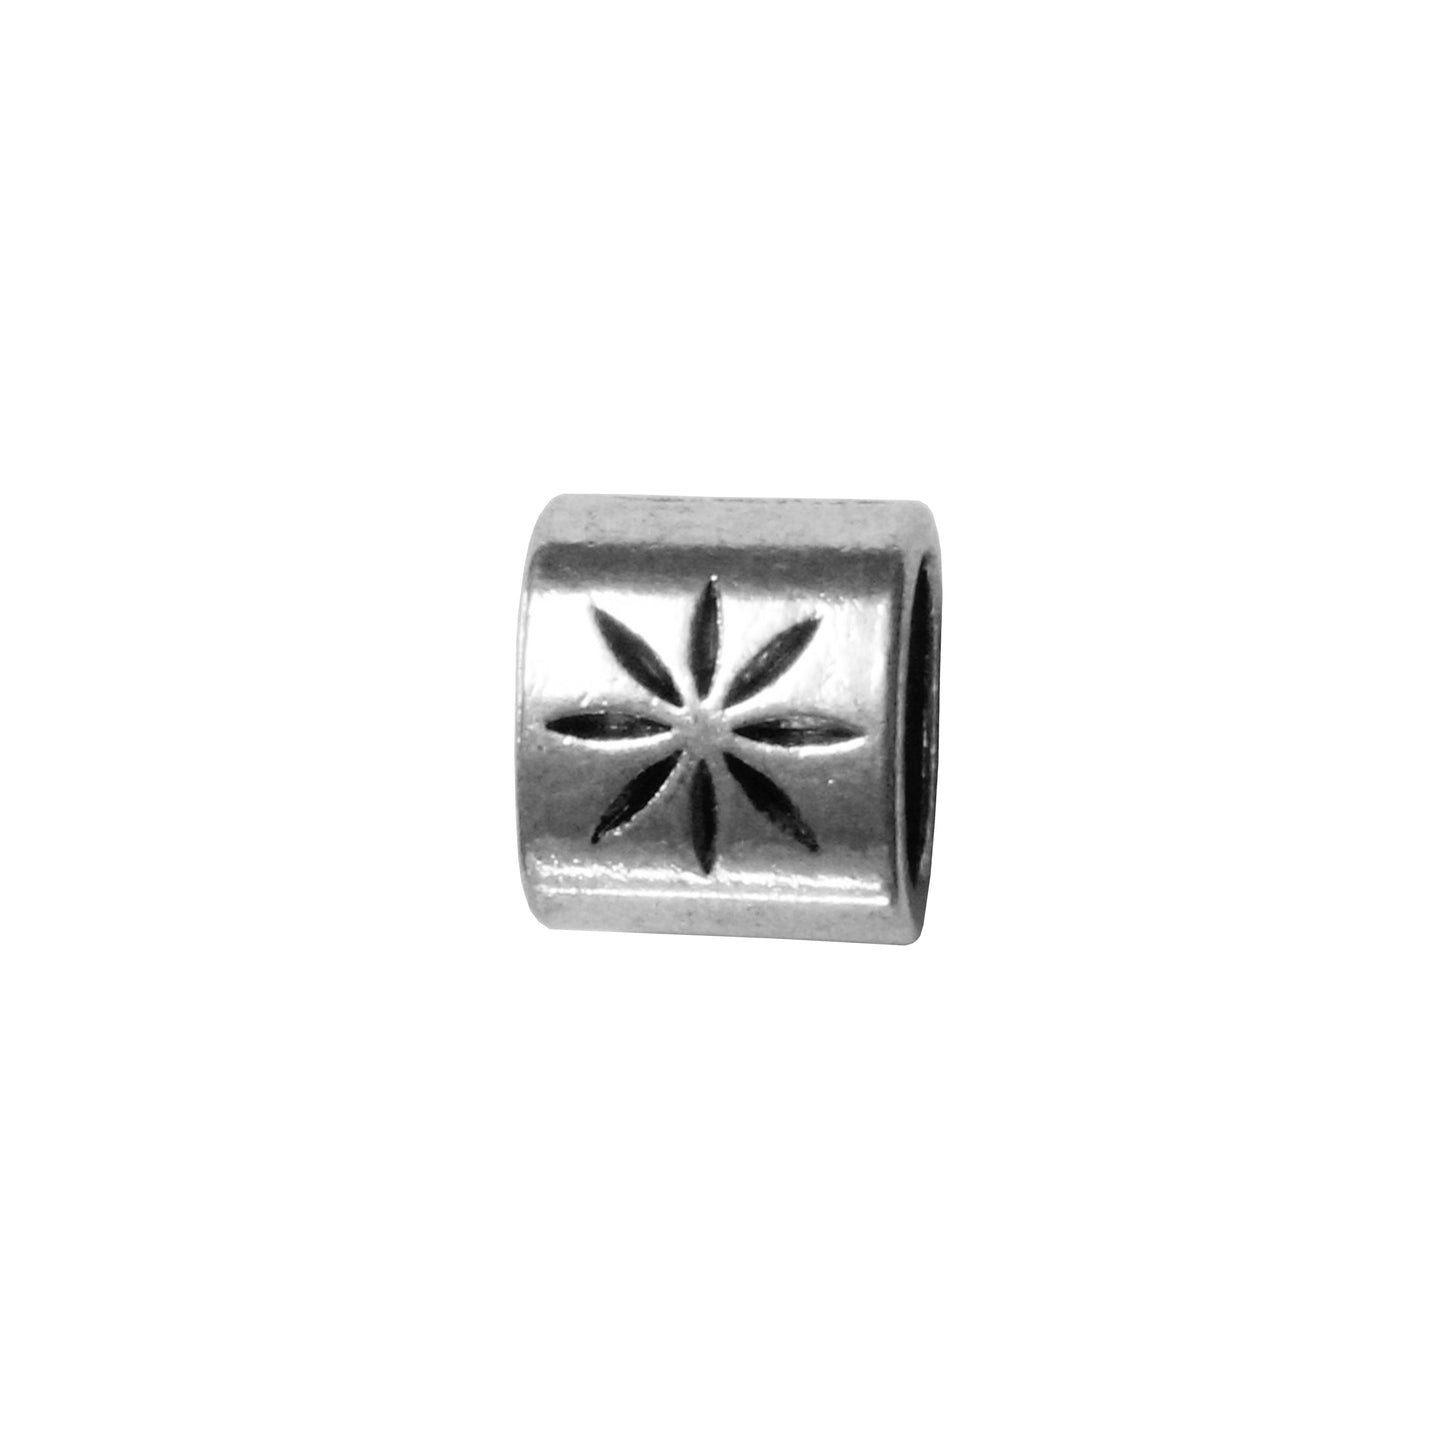 Starburst Slider Spacer Bead Antique Silver / 10 x 6.5mm / for use with licorice or Regaliz cords